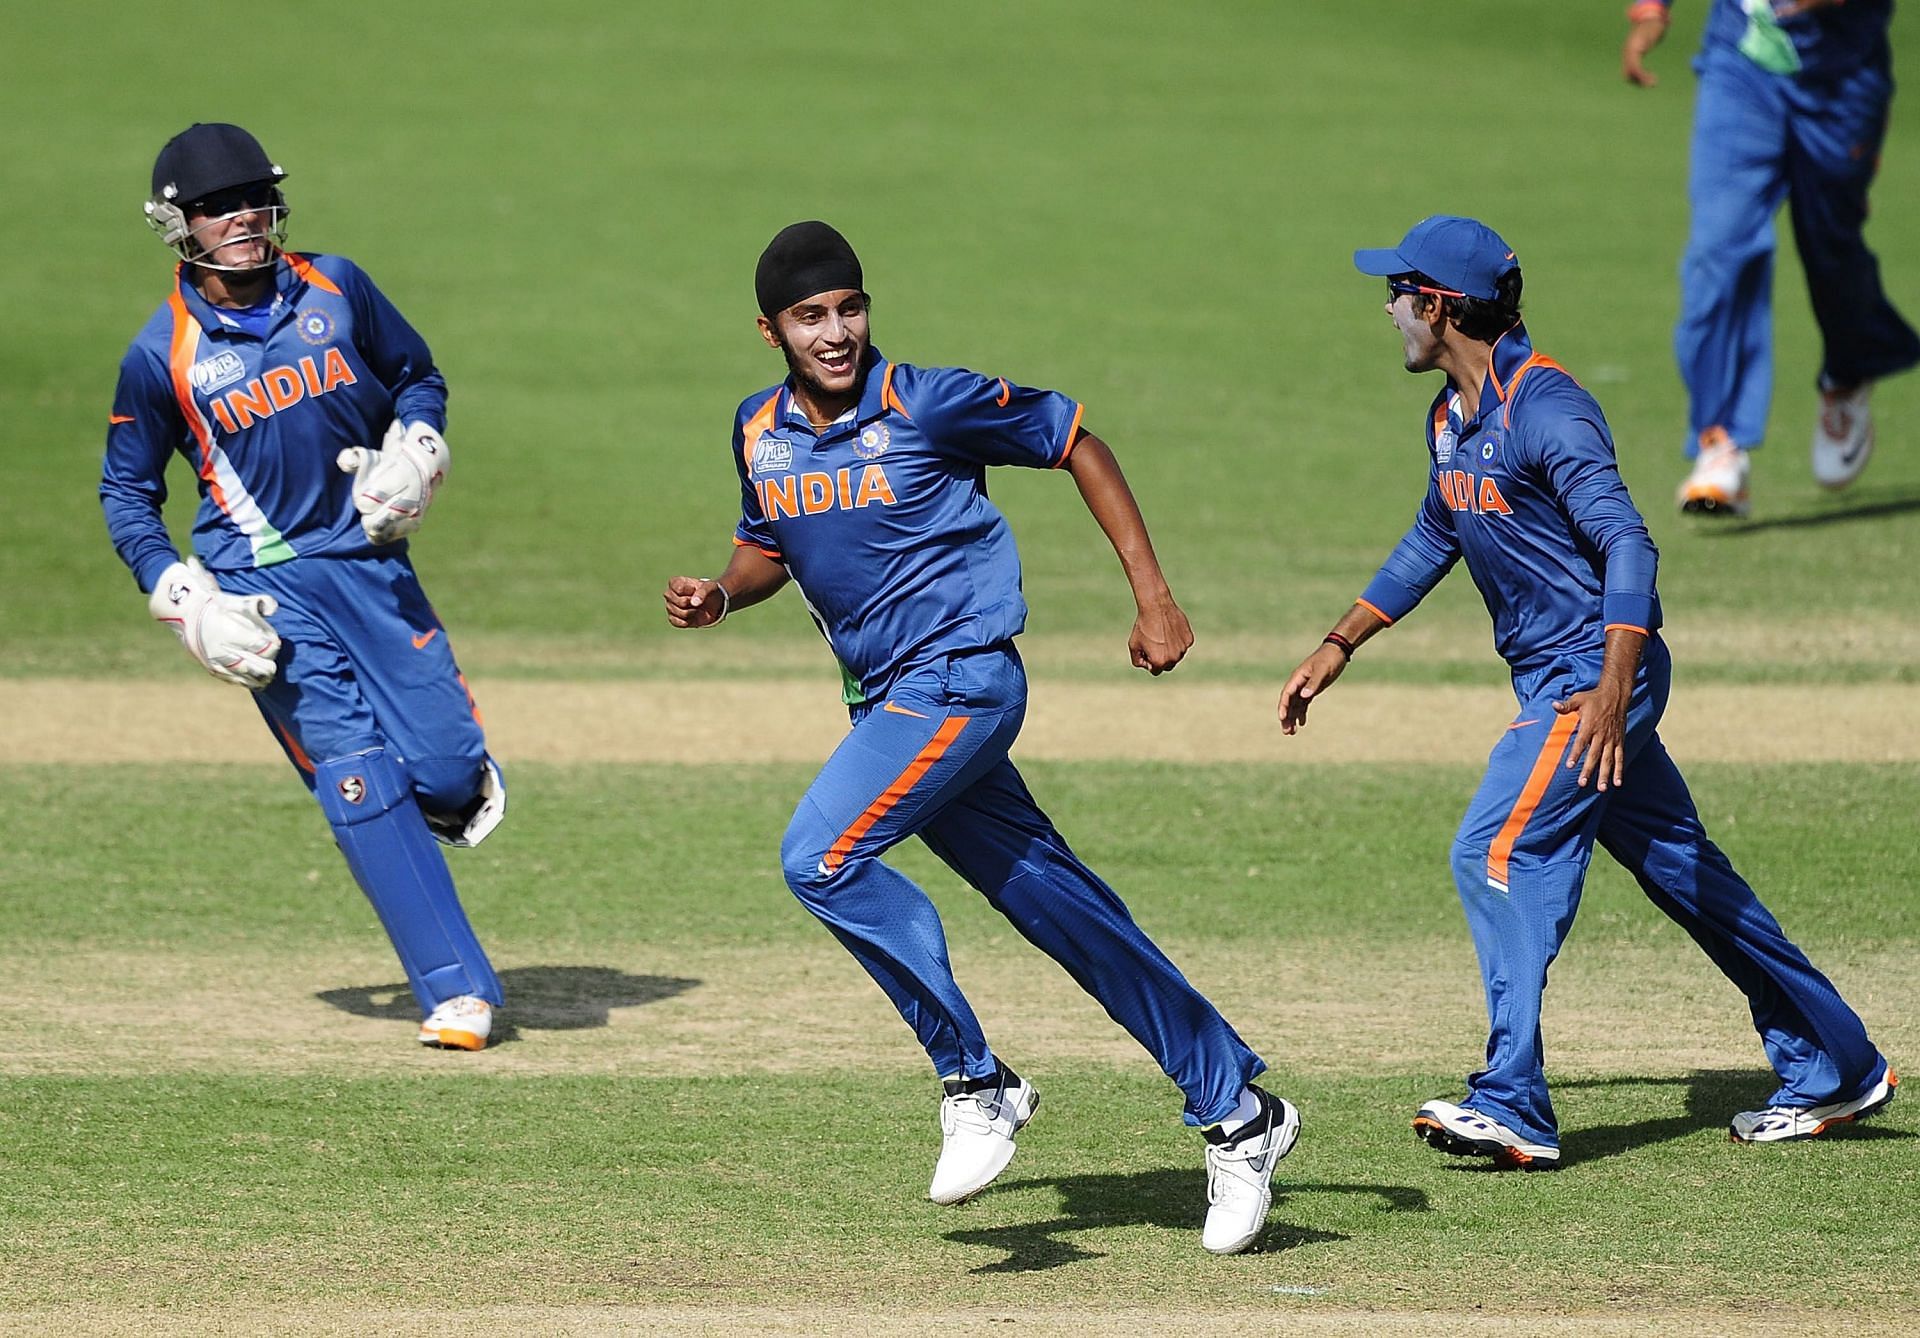 Harmeet Singh in action during the 2012 U-19 World Cup